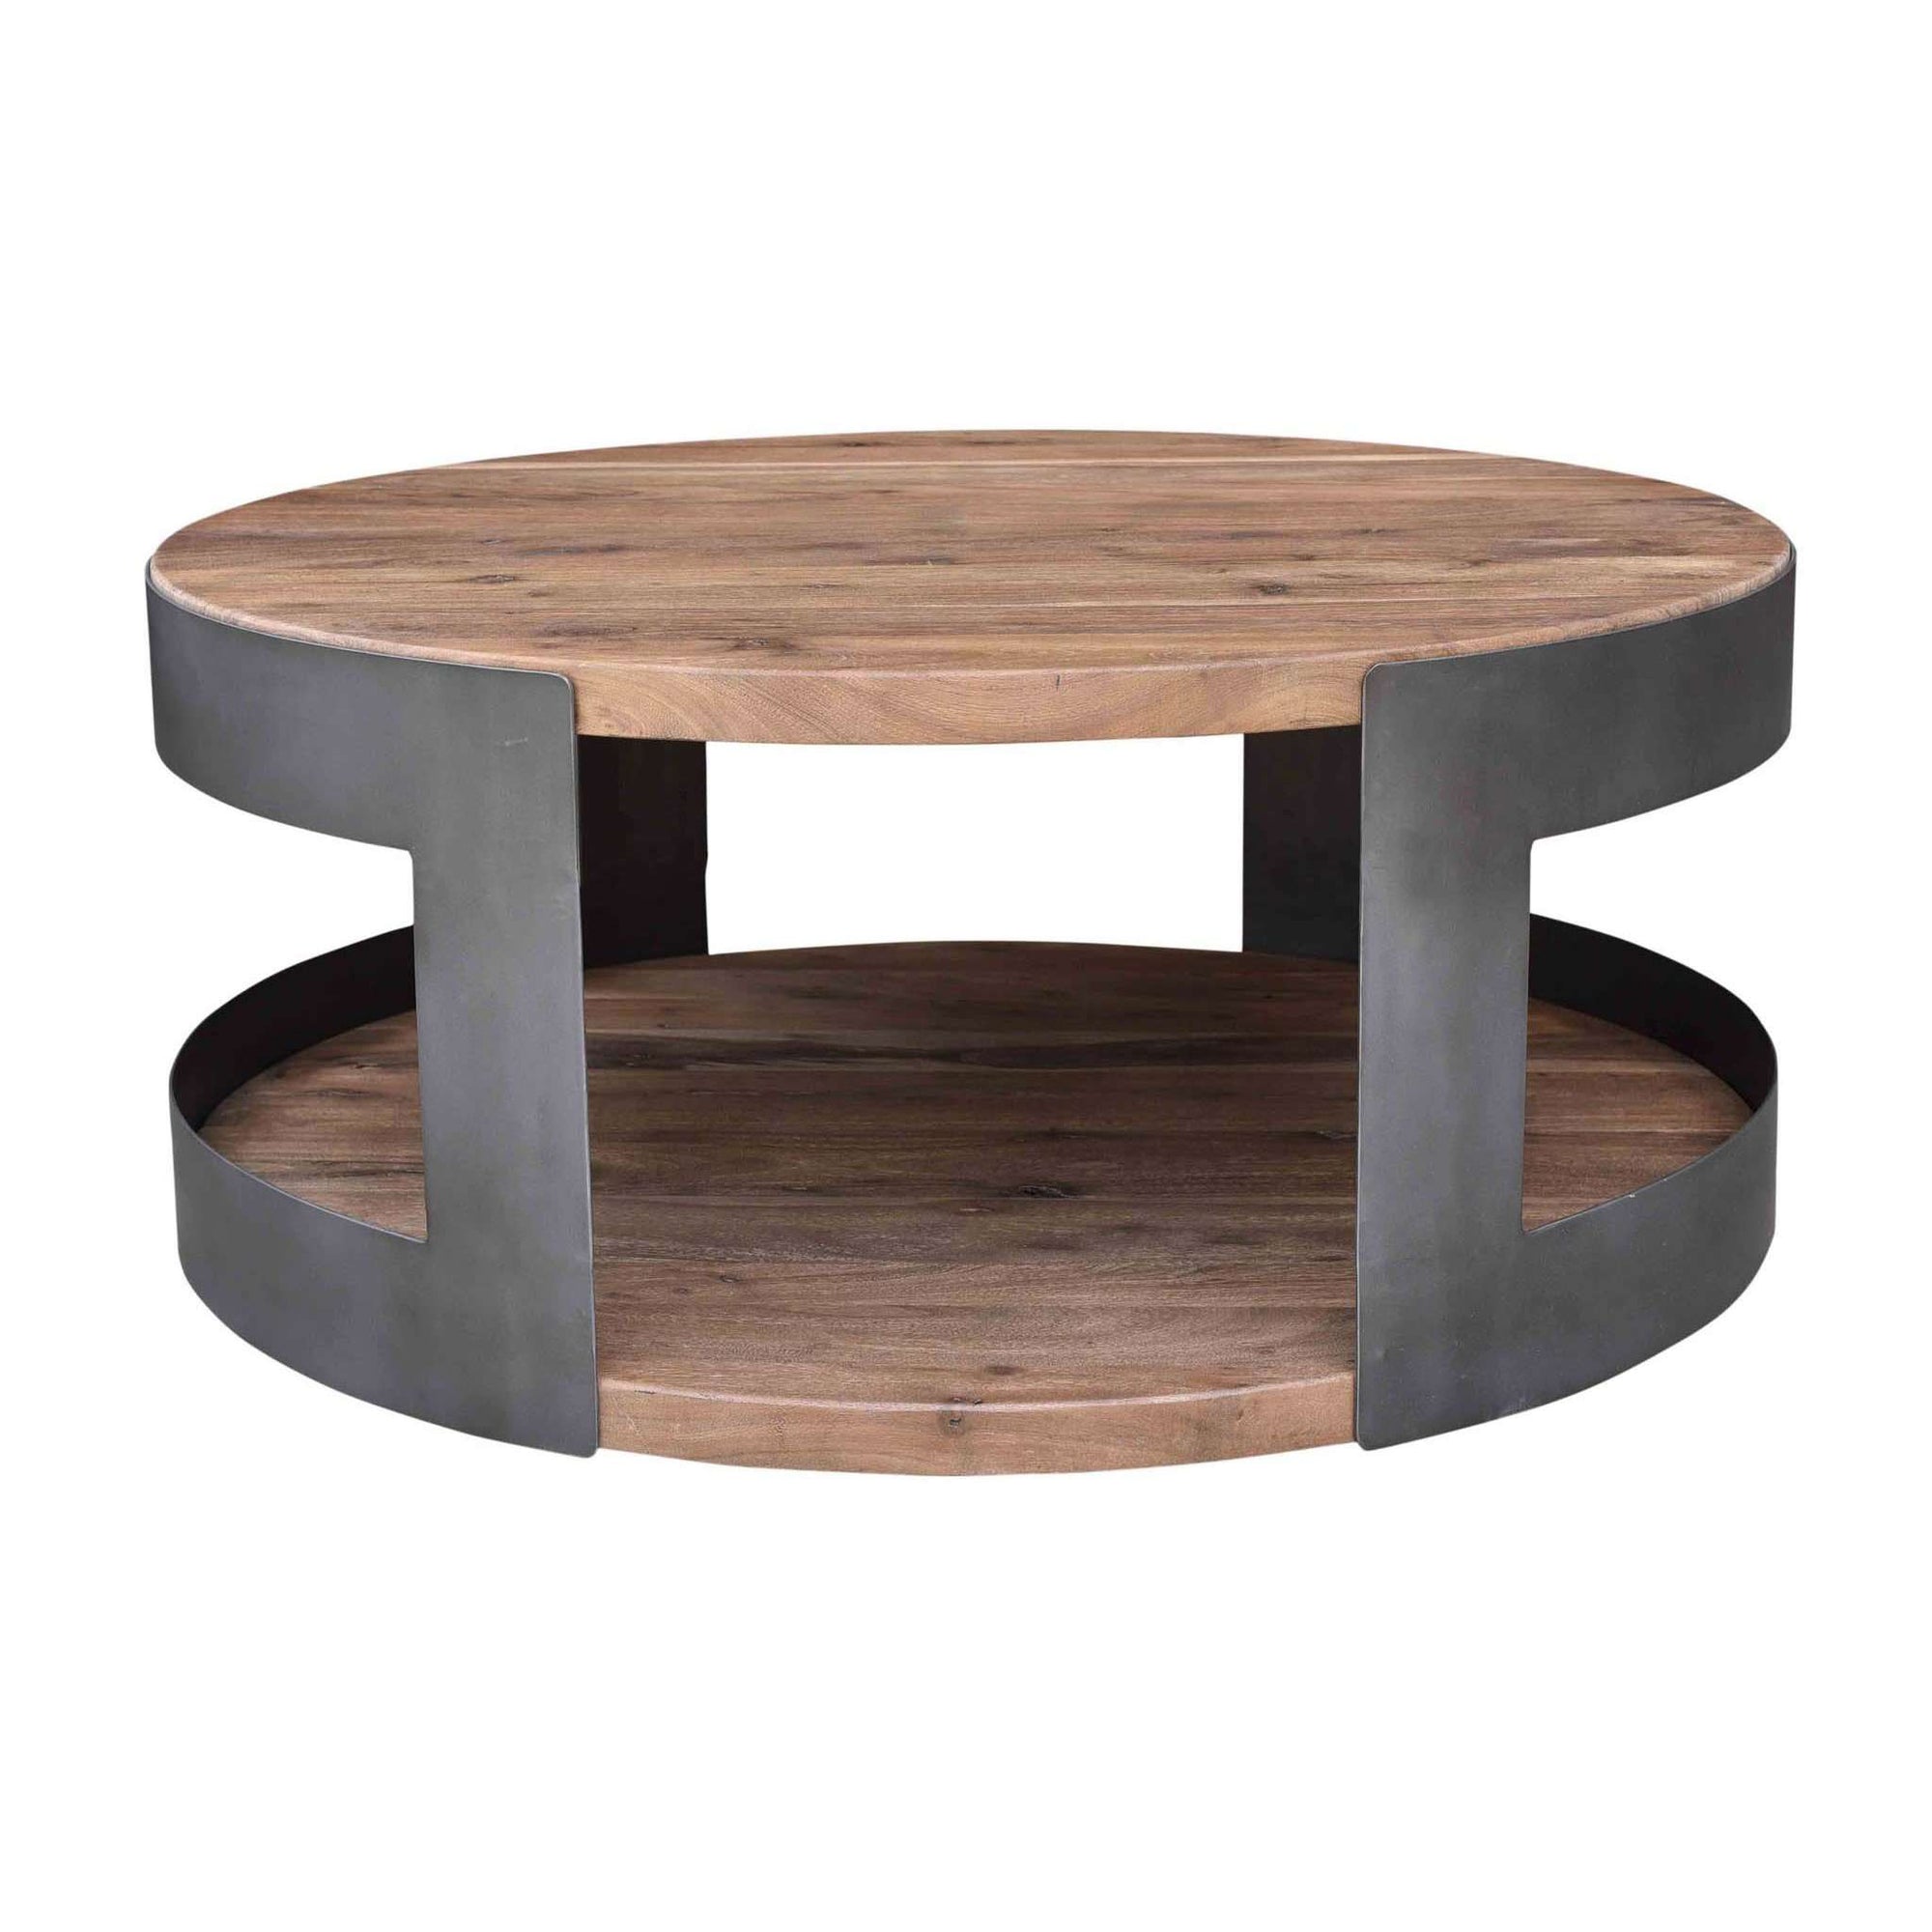 MOES-APRIL COFFEE TABLE-Coffee Tables-MODTEMPO